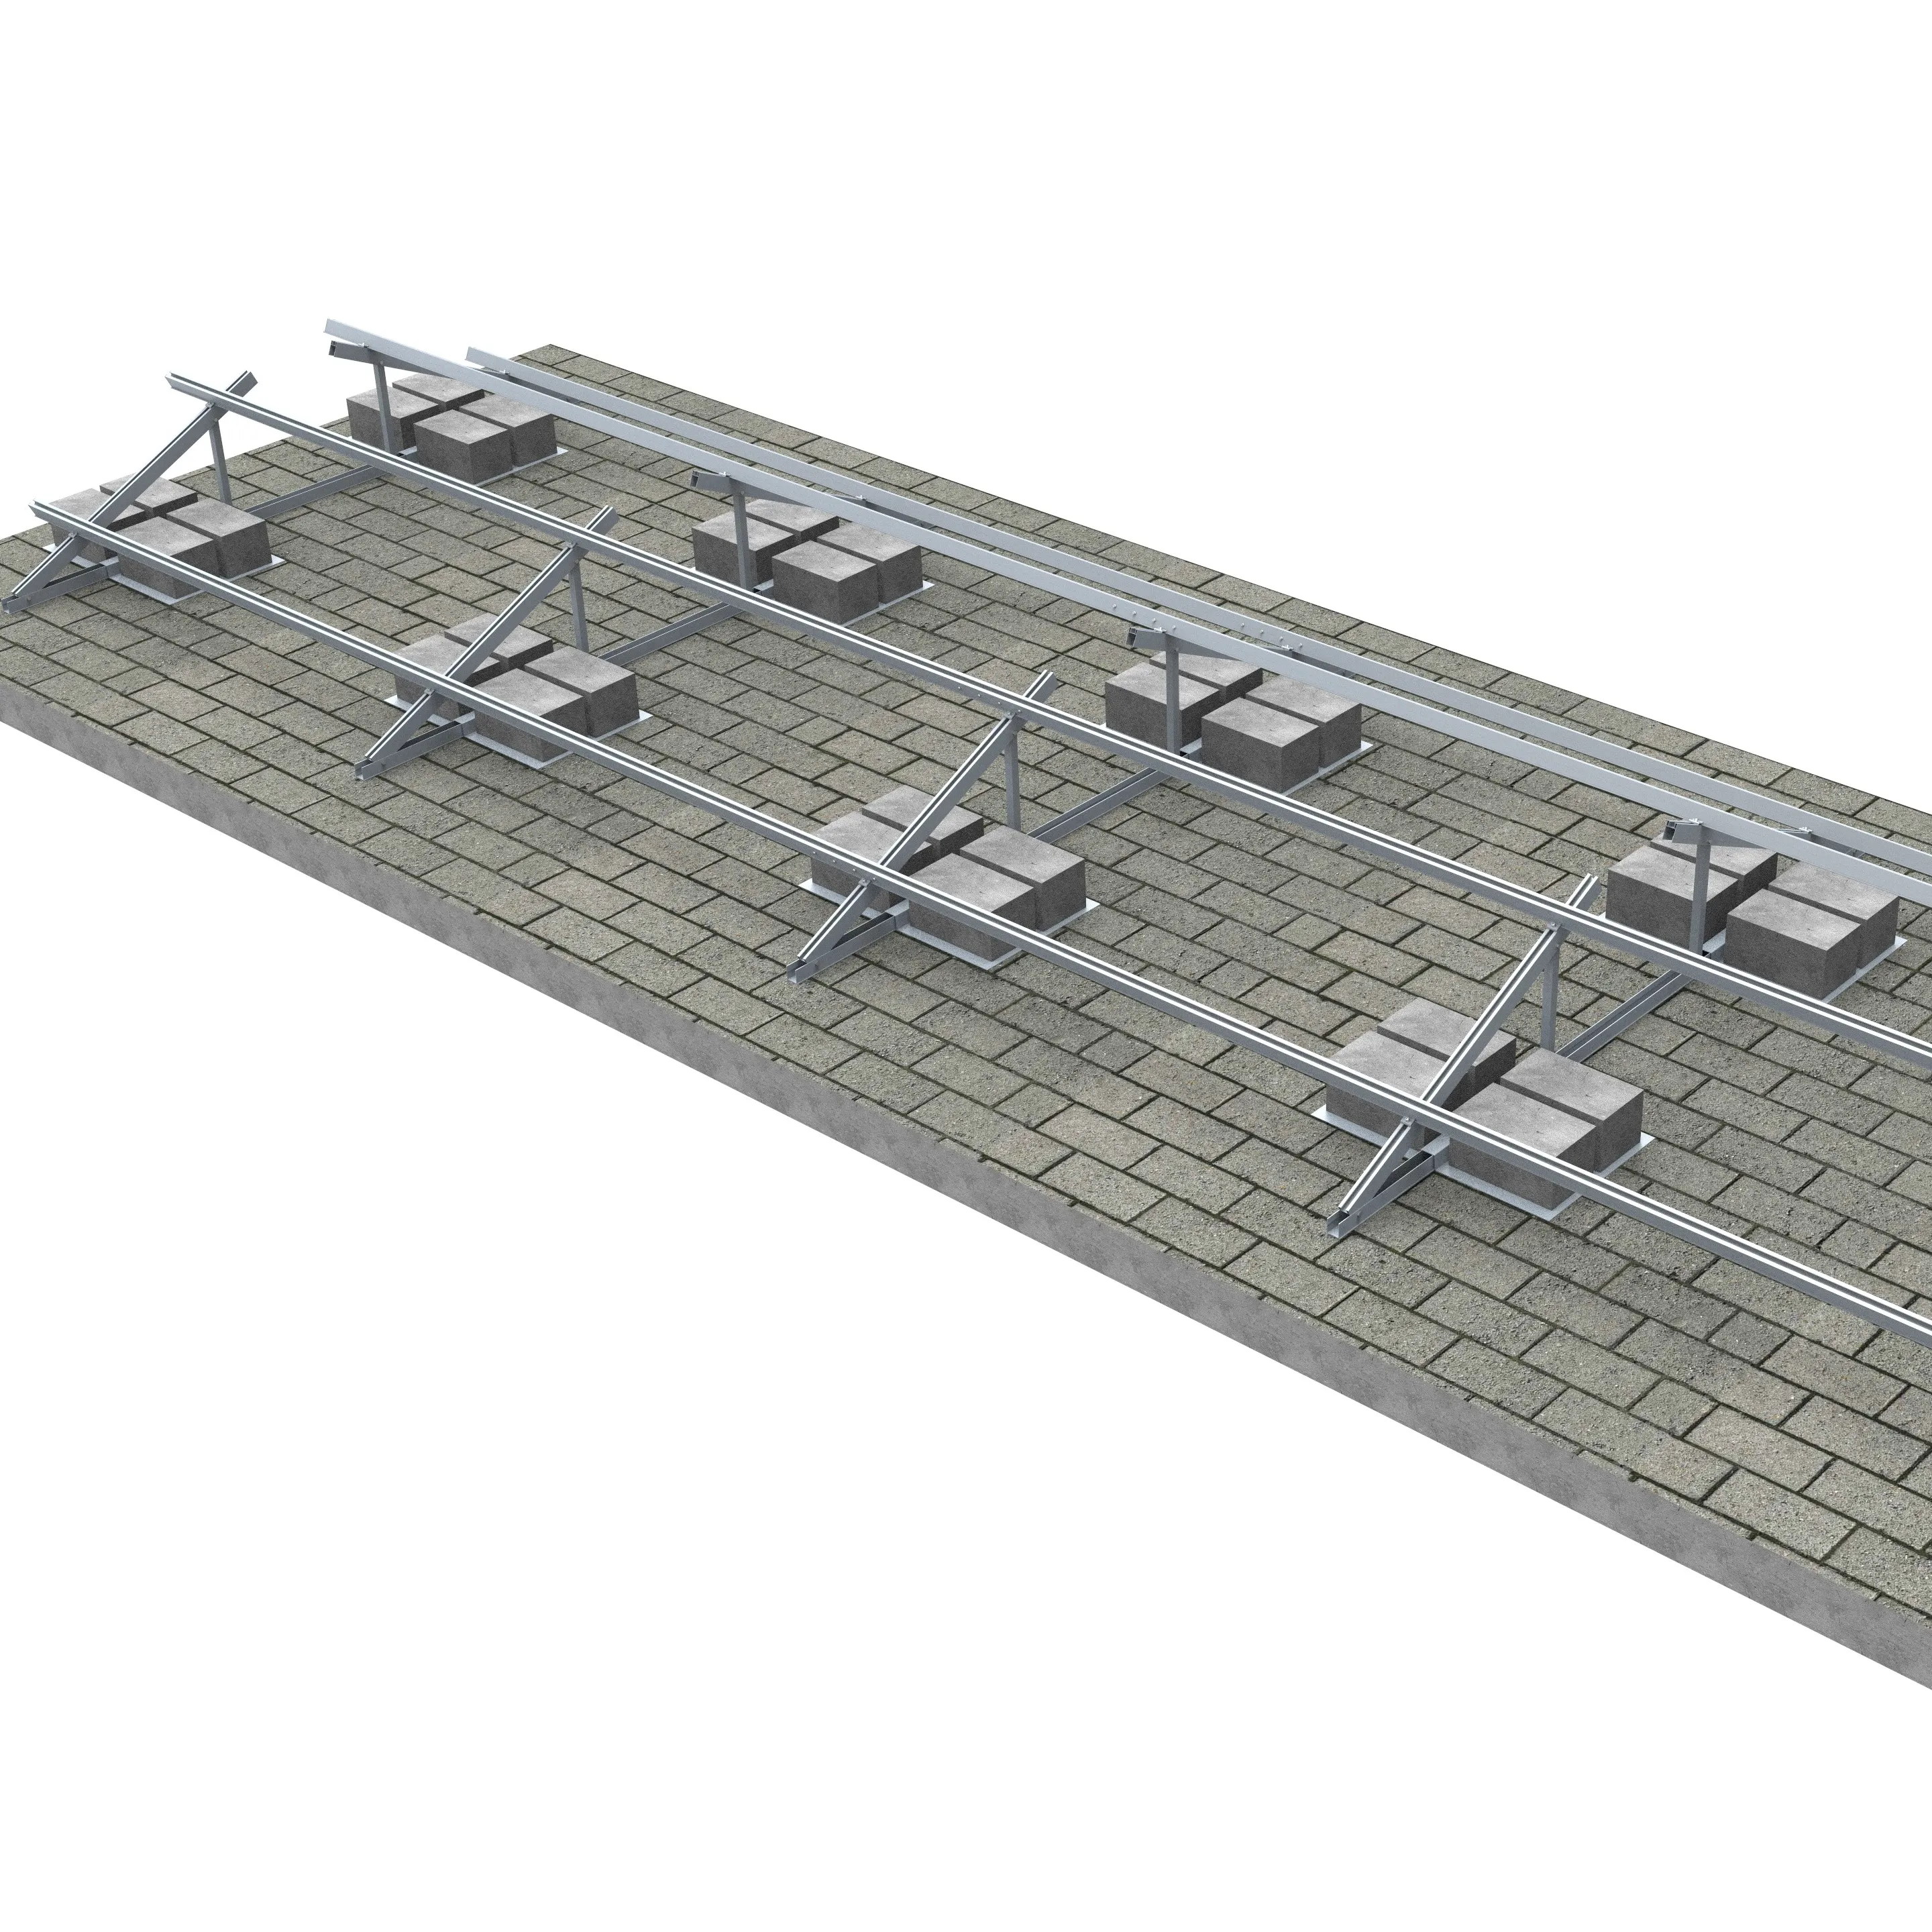 OEM Quick Mount Solar Panel Bracket Roof Ballasted Complete Solar Power 1500 watts Concrete Rooftop Mounting Structure